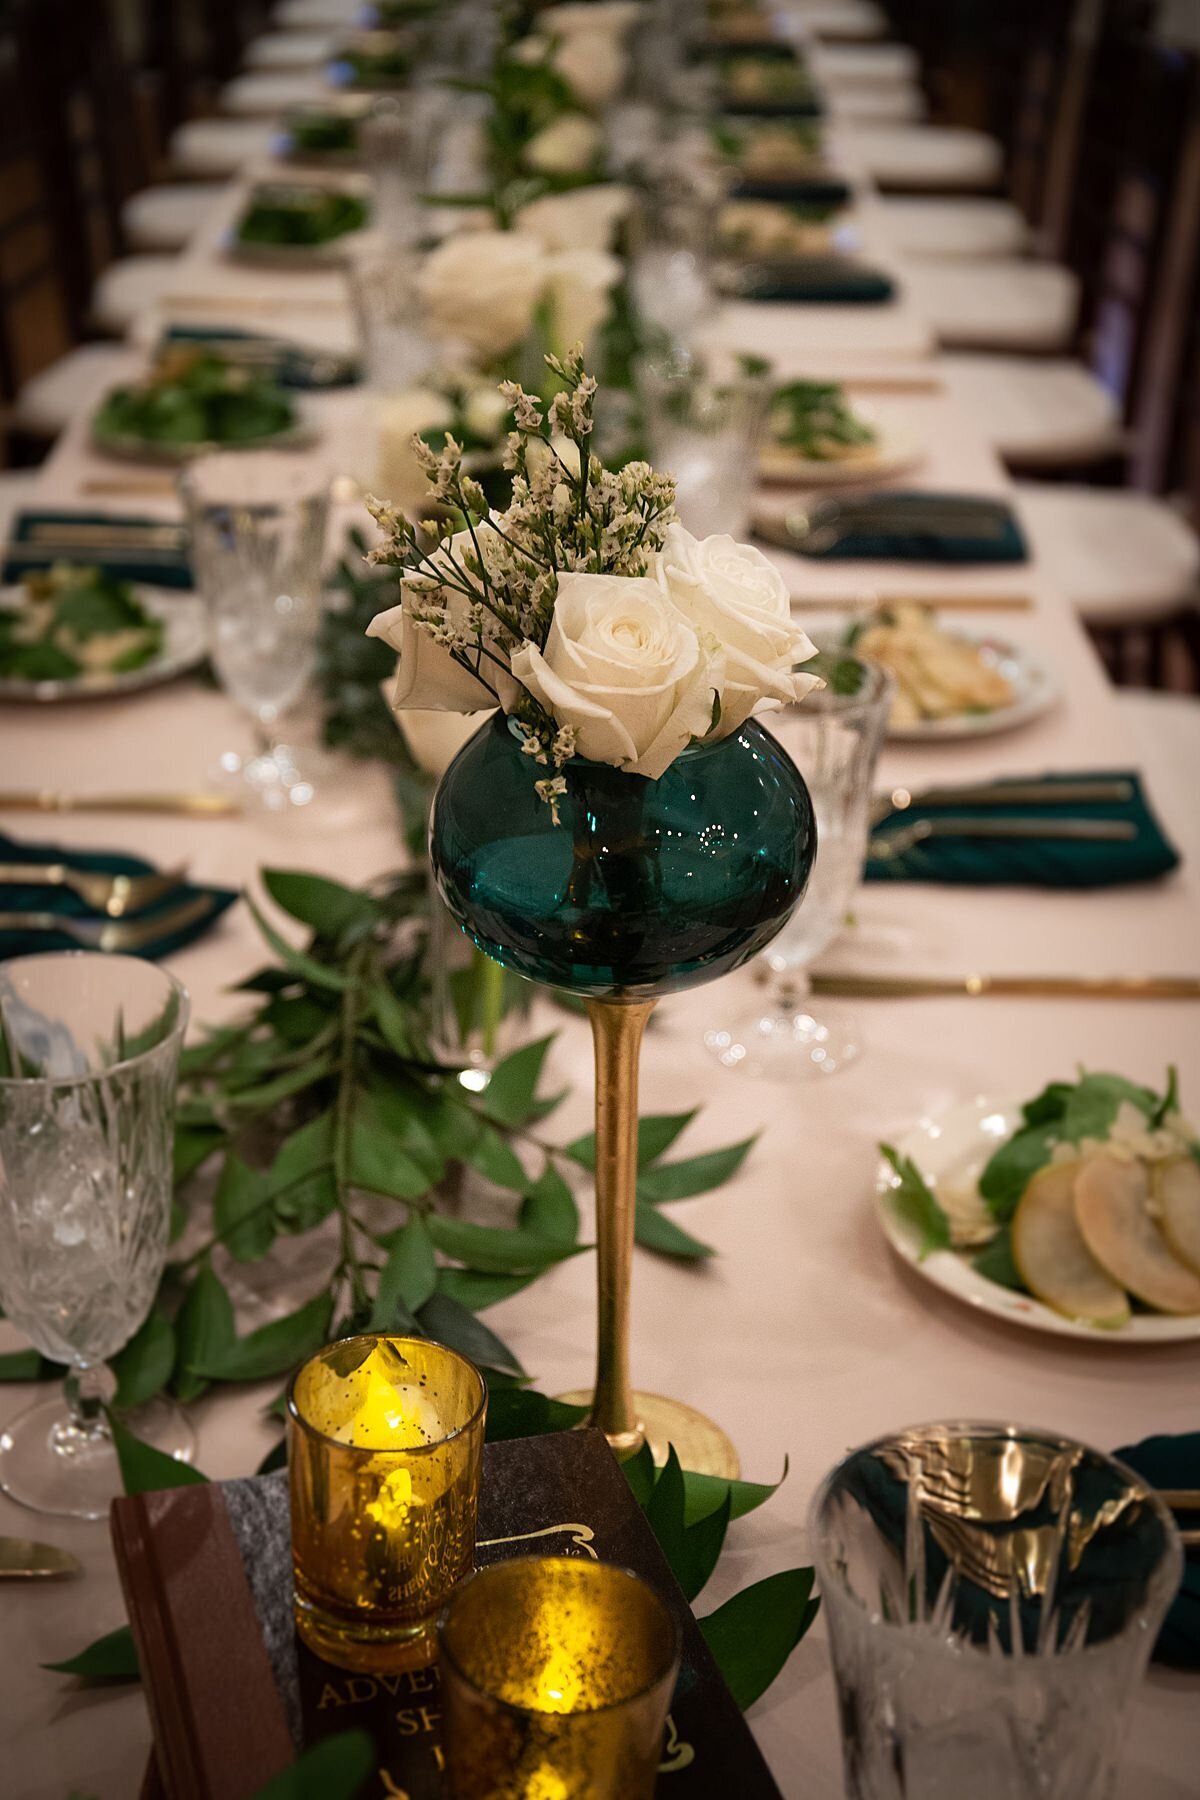 long banquet table with white table cloths are set with emerald green napkins, gold flatware, cut crystal goblets and pear salads. Gold votive candles, emerald green glass vases and long garlands of greenery with white roses run the length of the long table at Oaklands Mansion.